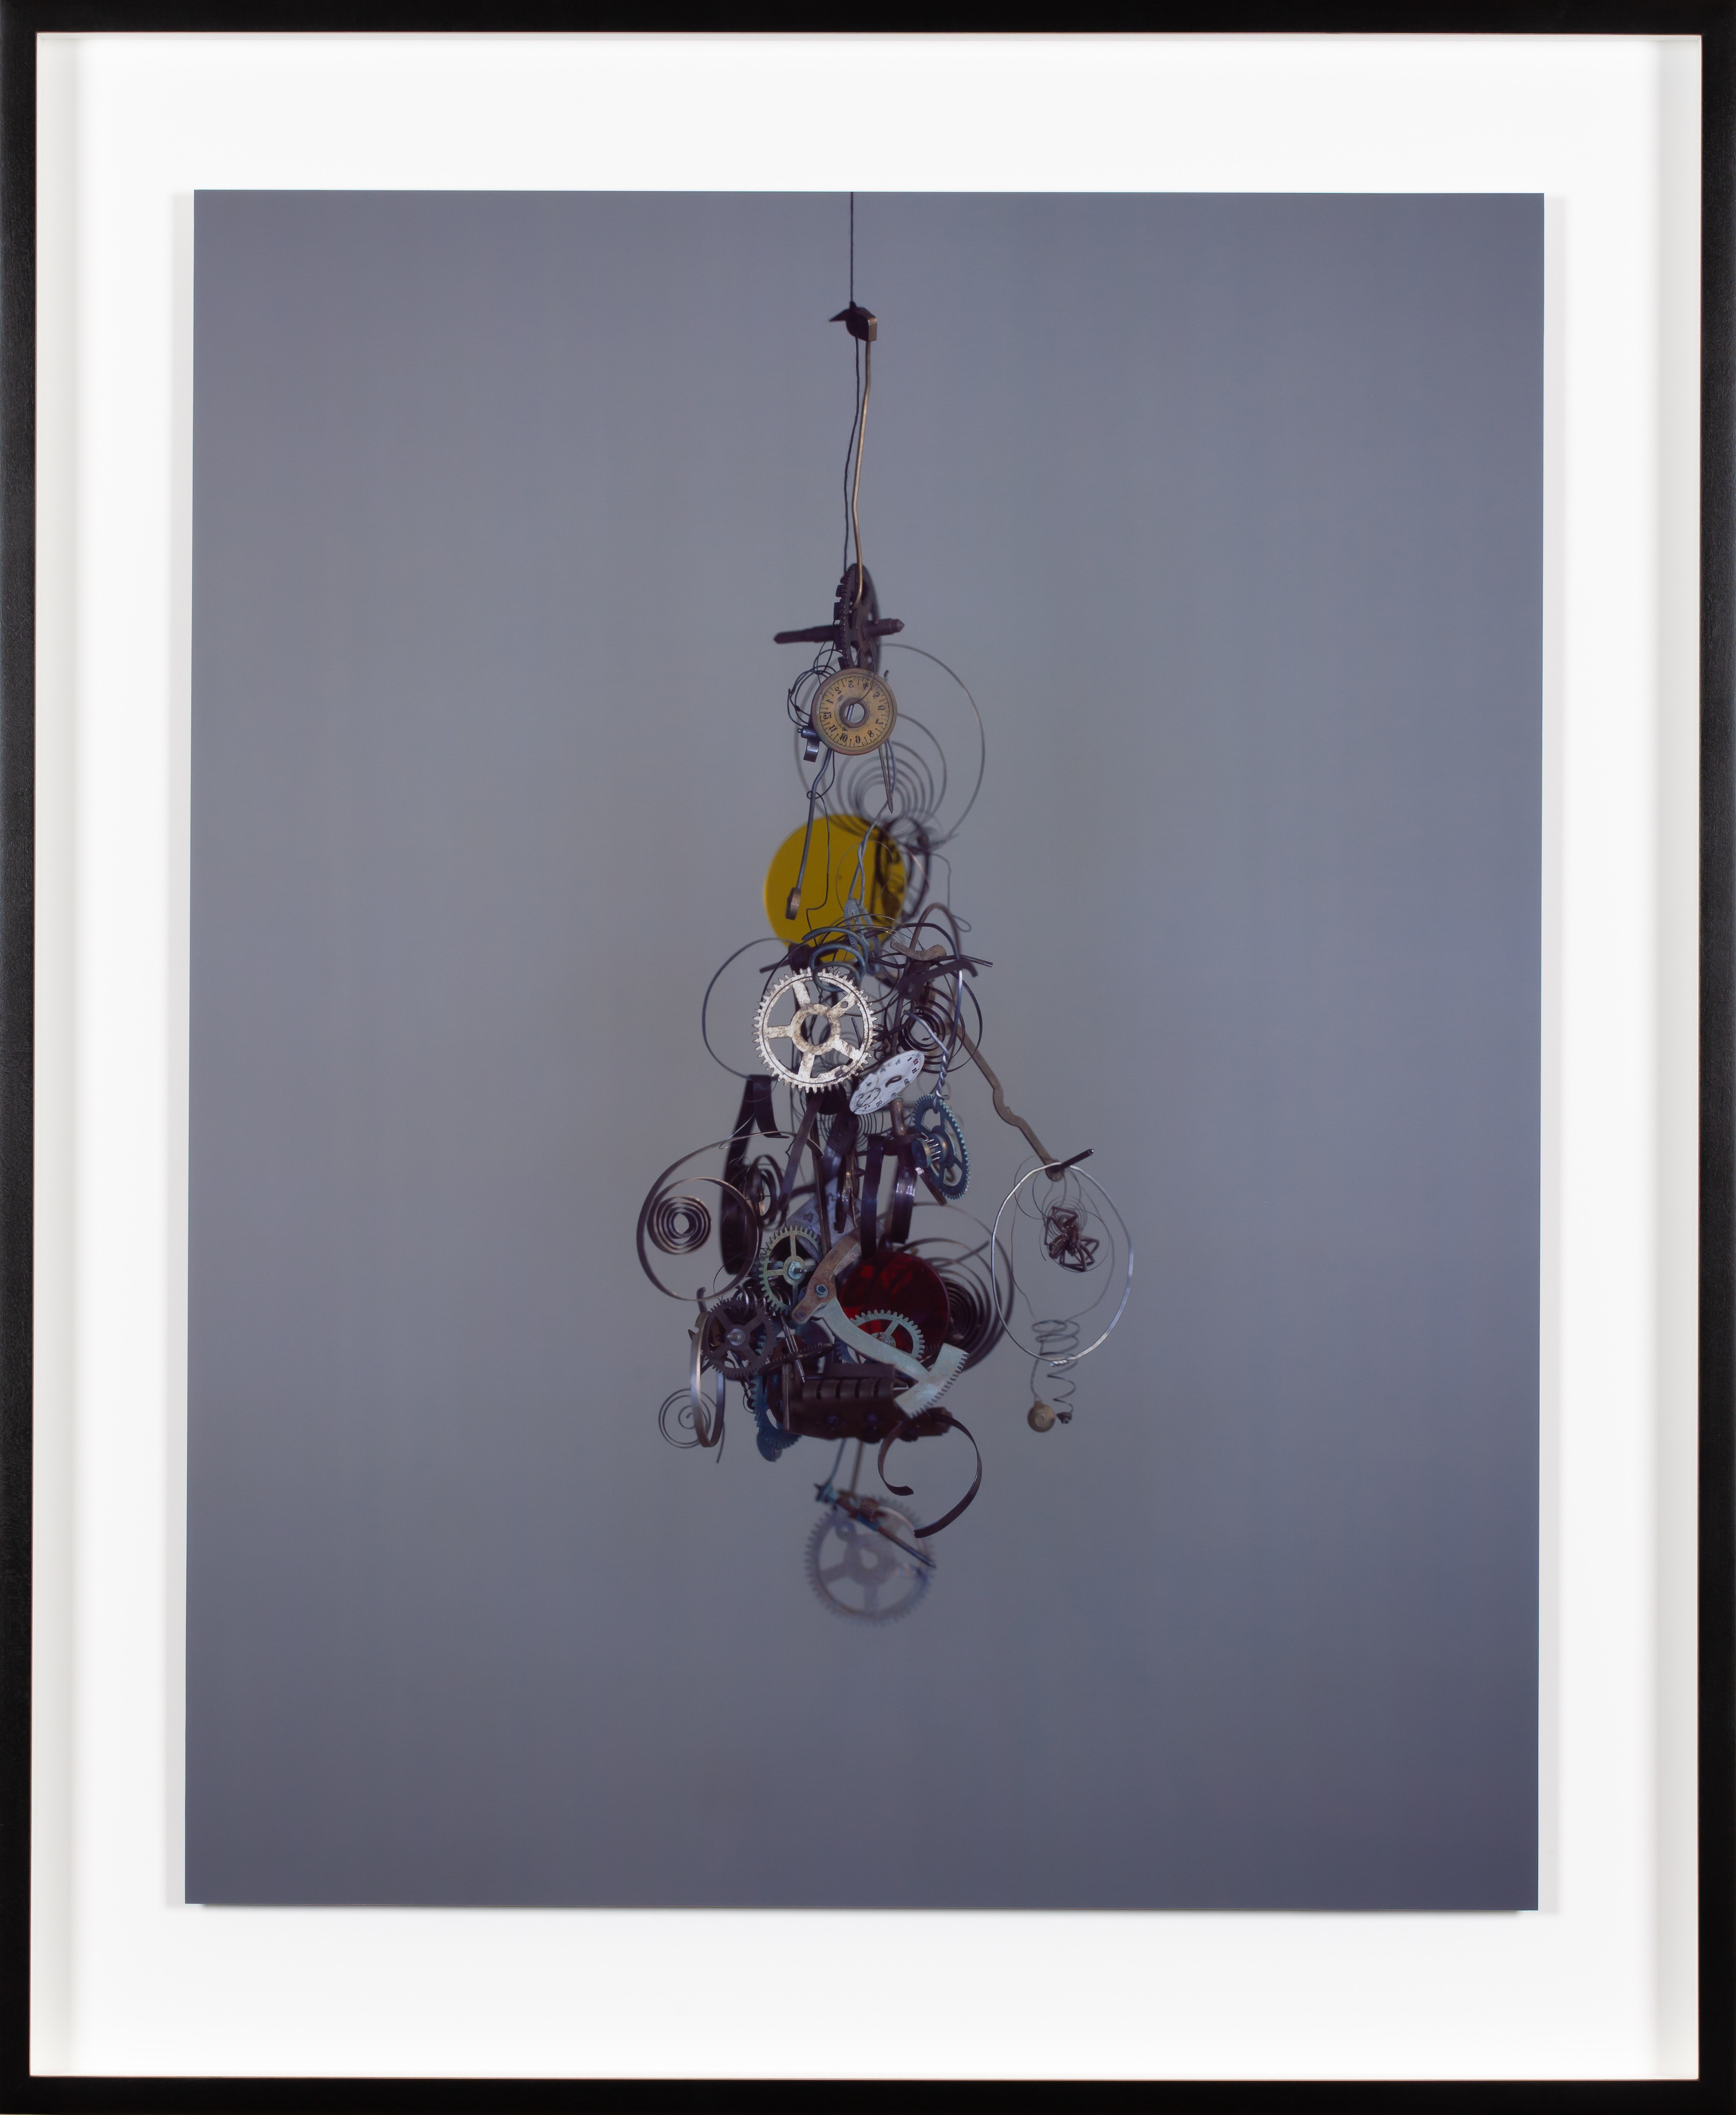 Framed color photograph of a cluster of clock gears suspended on a wire